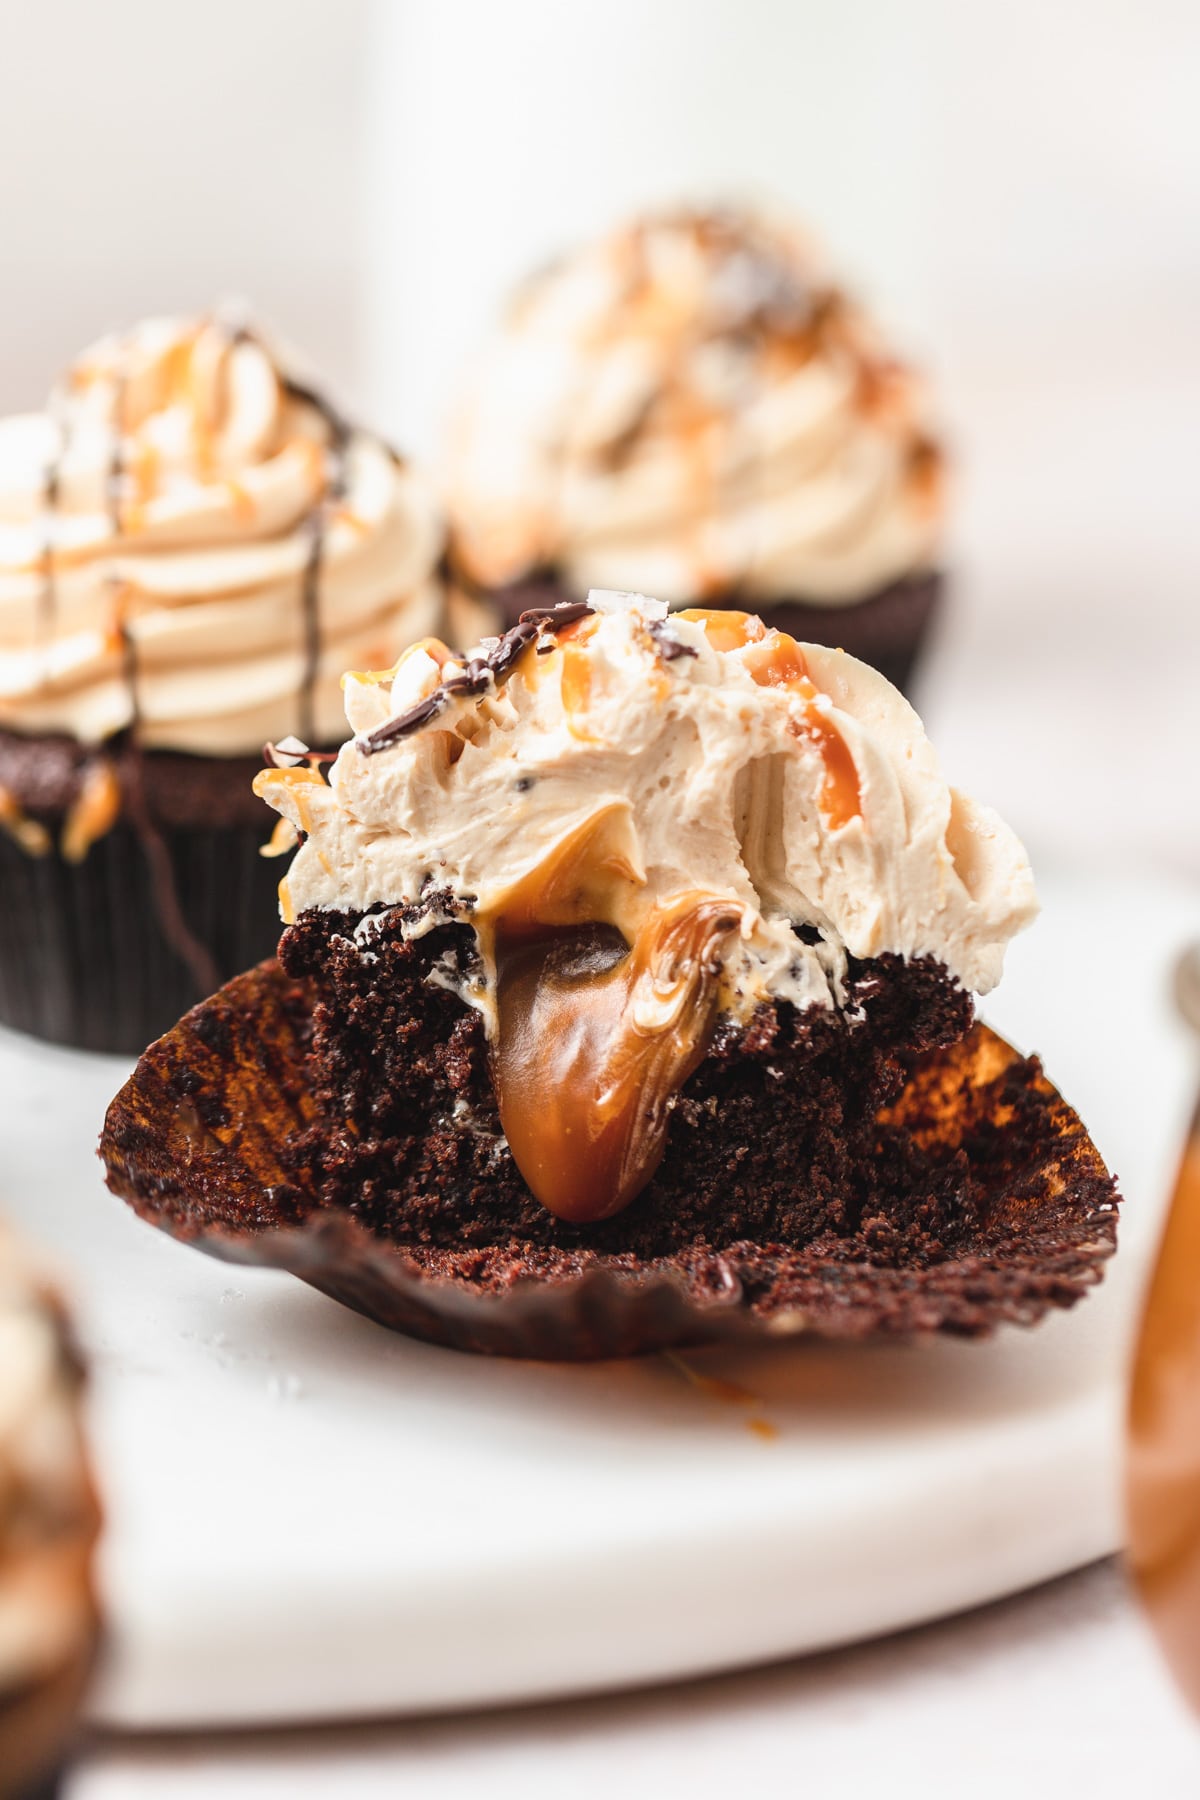 chocolate caramel cupcakes cut in half with caramel oozing out.